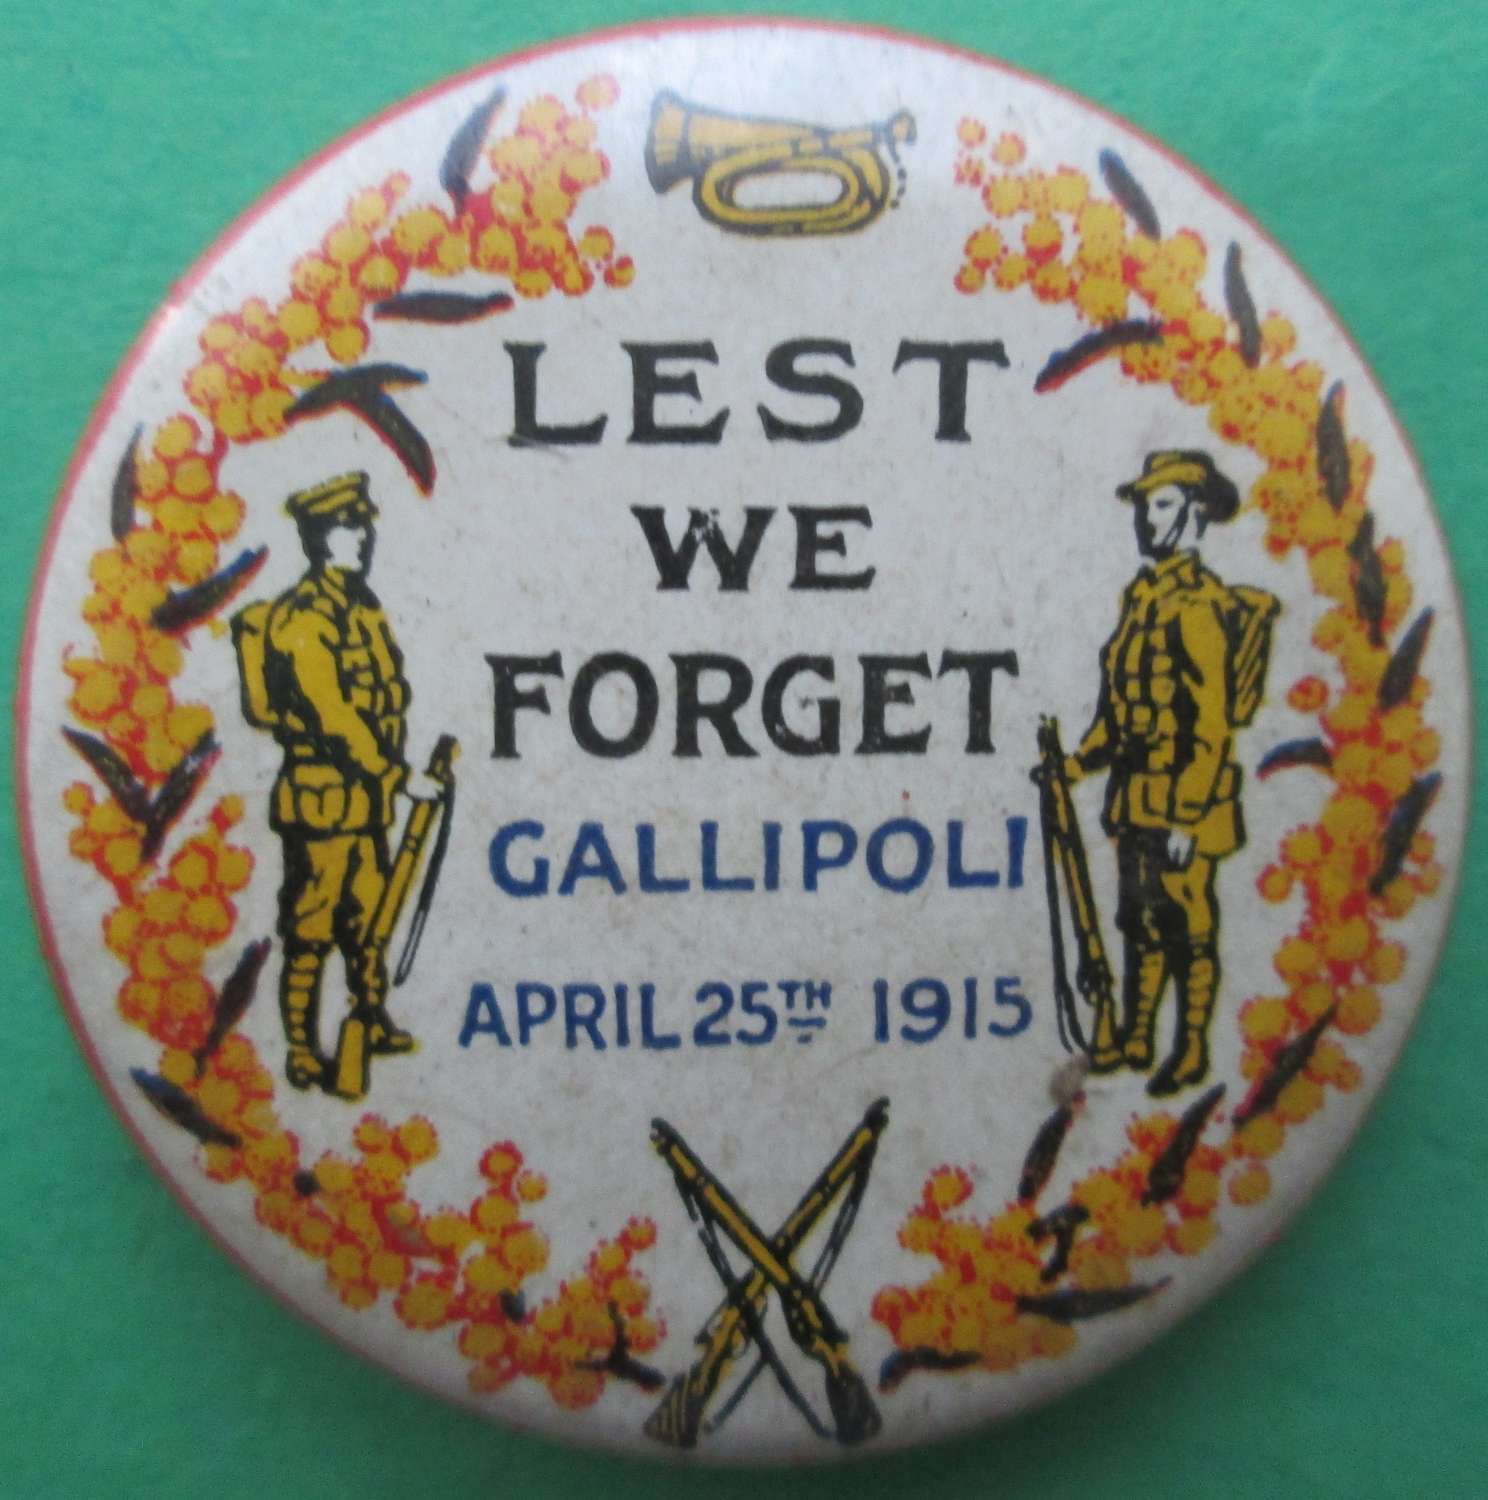 A WWI LEST WE FORGET GALLIPOLI APRIAL 25th 1915 BADGE